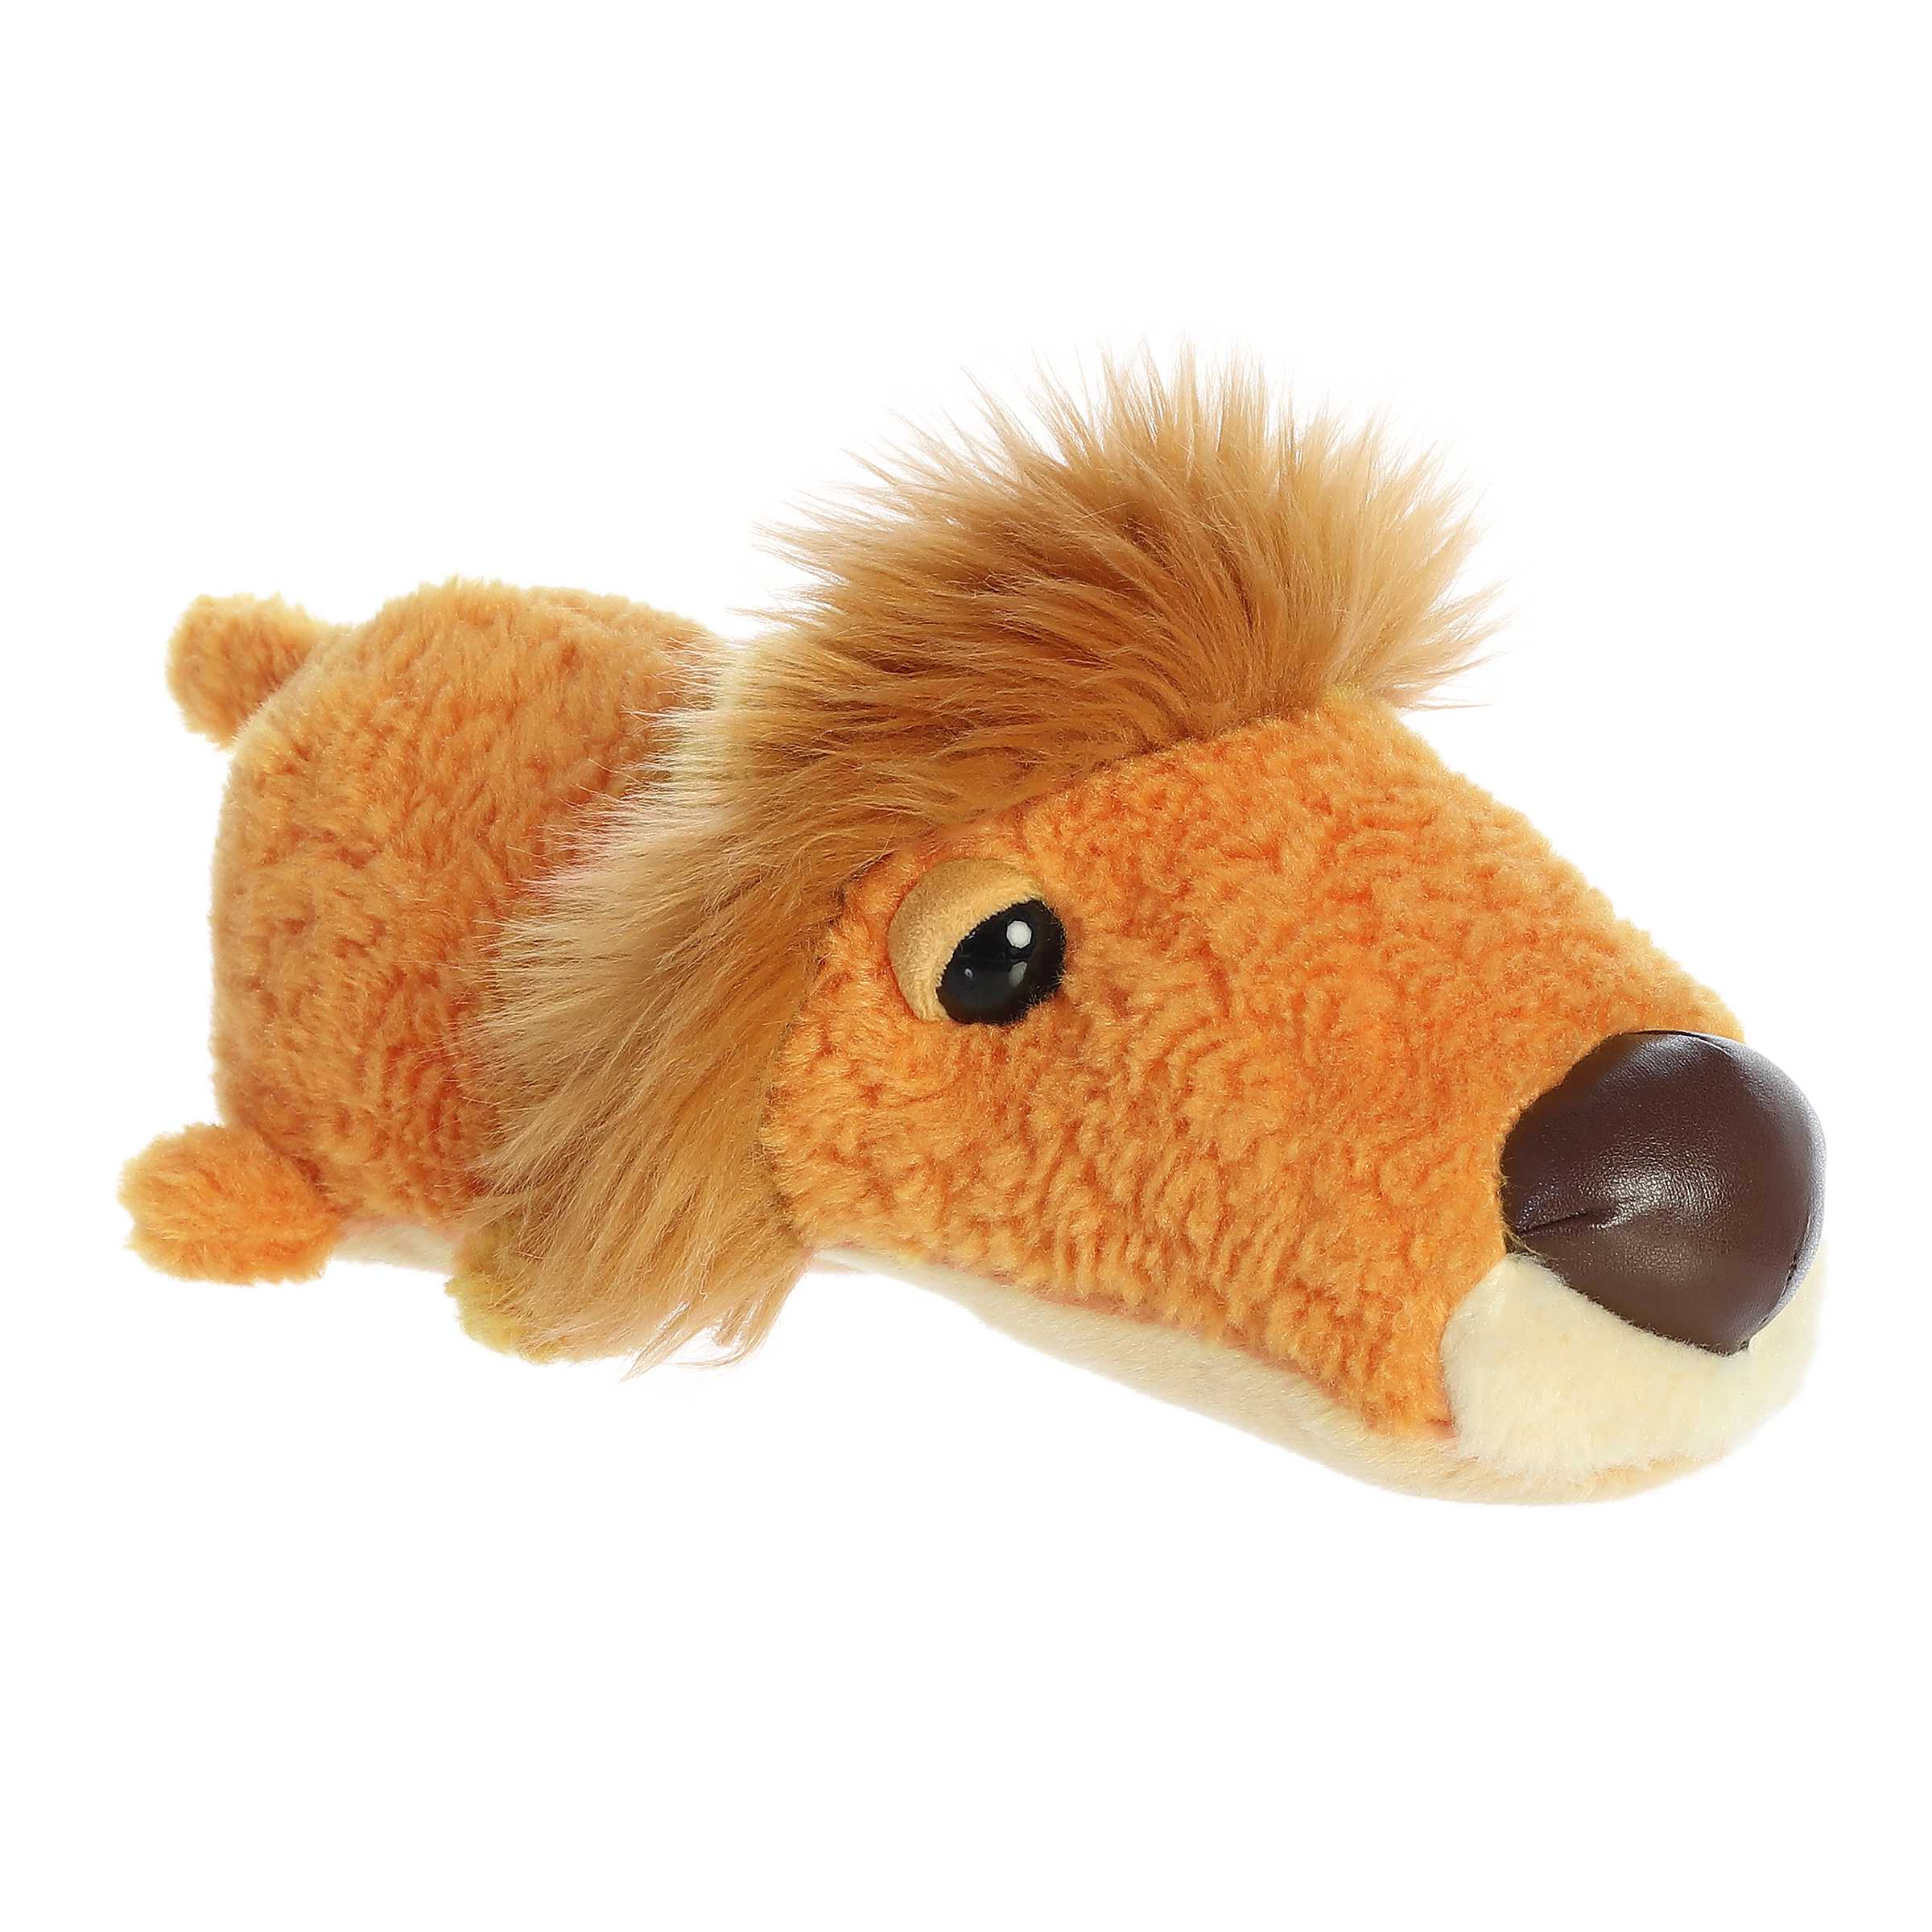 Royal Lion Majestic Mane from Schnozzles, with a unique oversized snout and mane, great for safari-themed play.